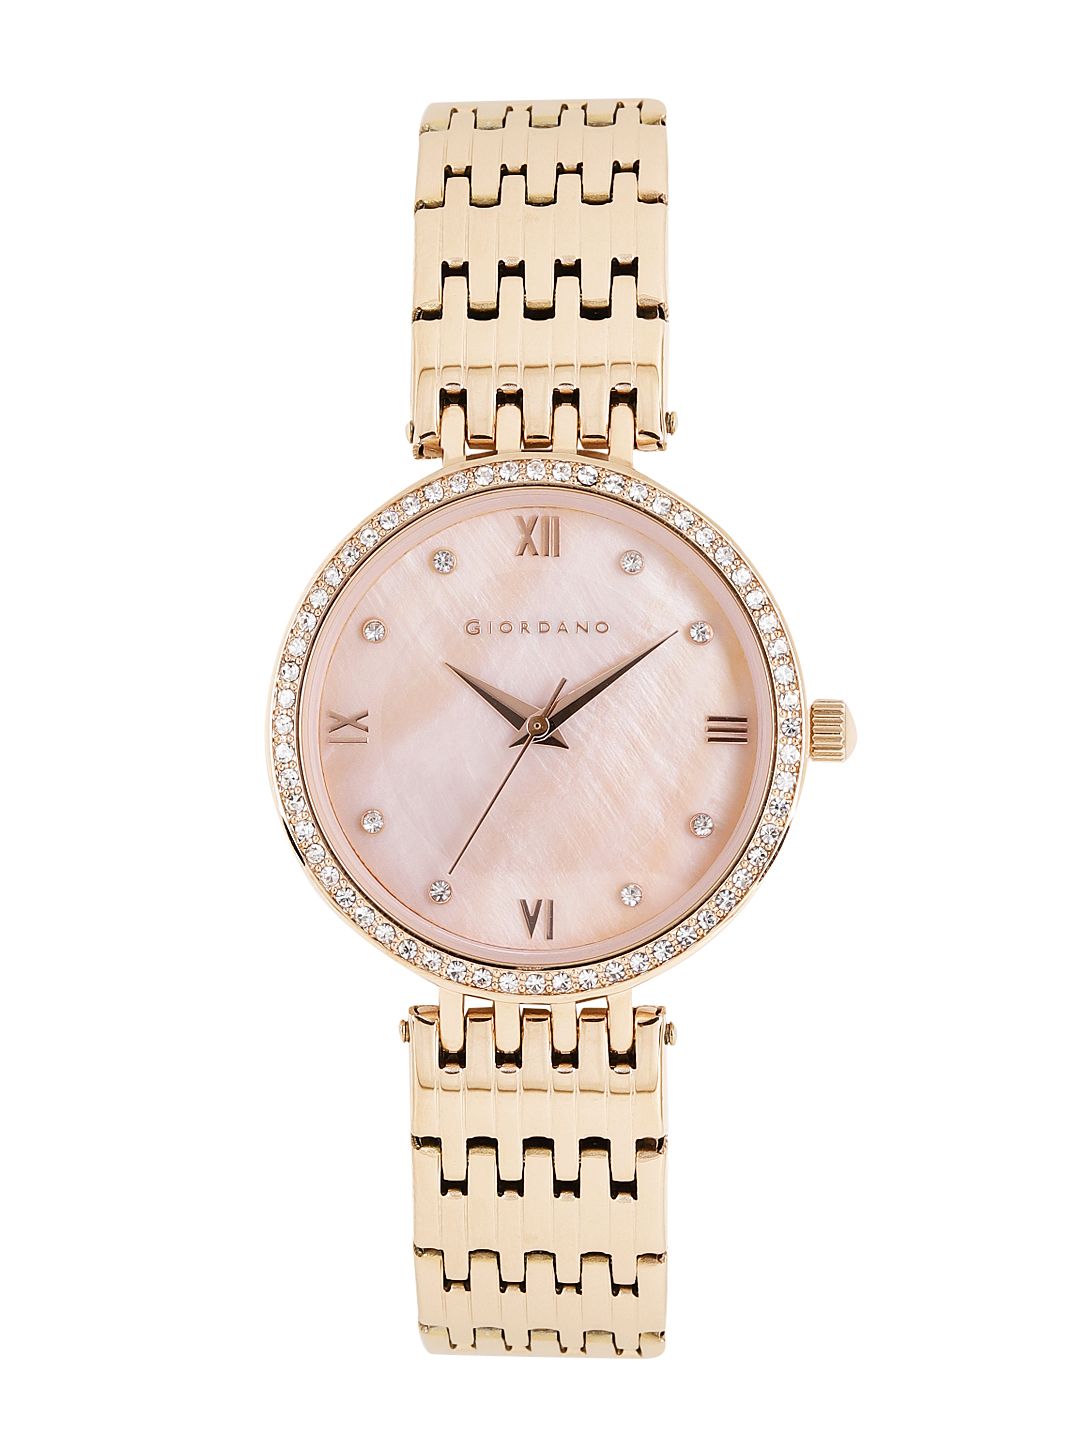 GIORDANO Women Rose Gold Analogue Watch A2060-33 Price in India